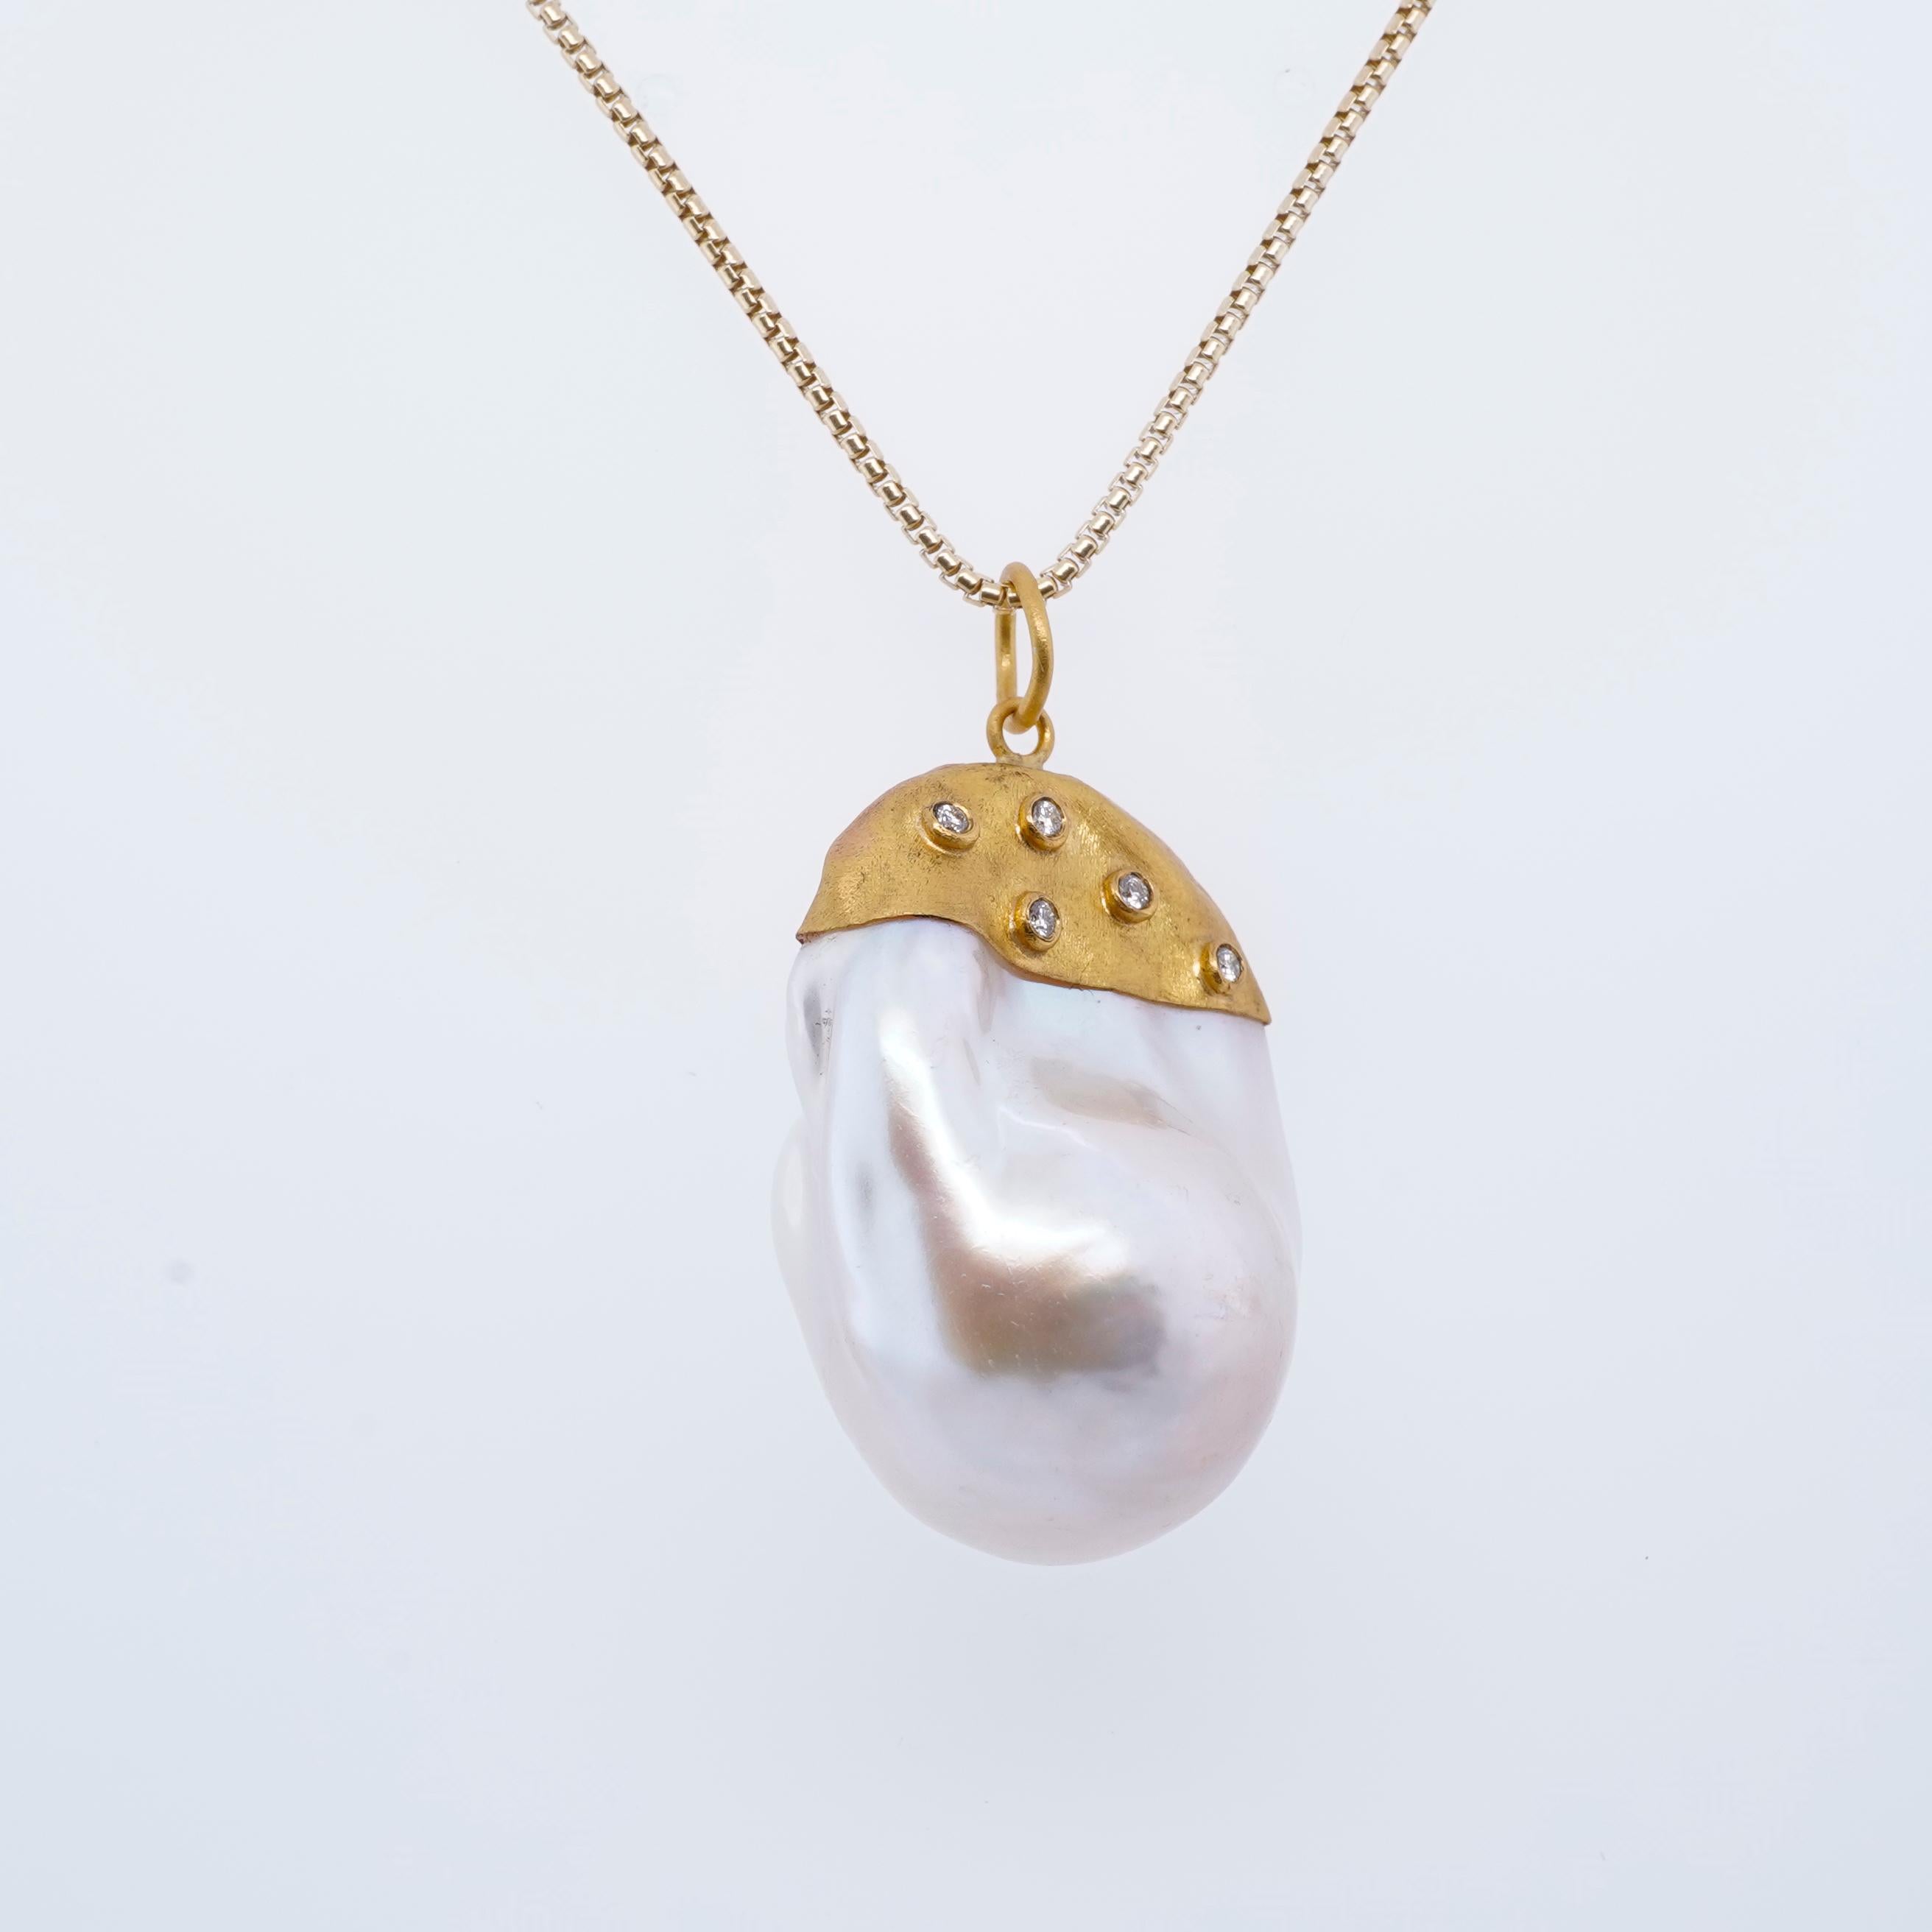 Large, 64ct Baroque Pearl Pendant Necklace with Diamonds, 24kt Solid Gold For Sale 1